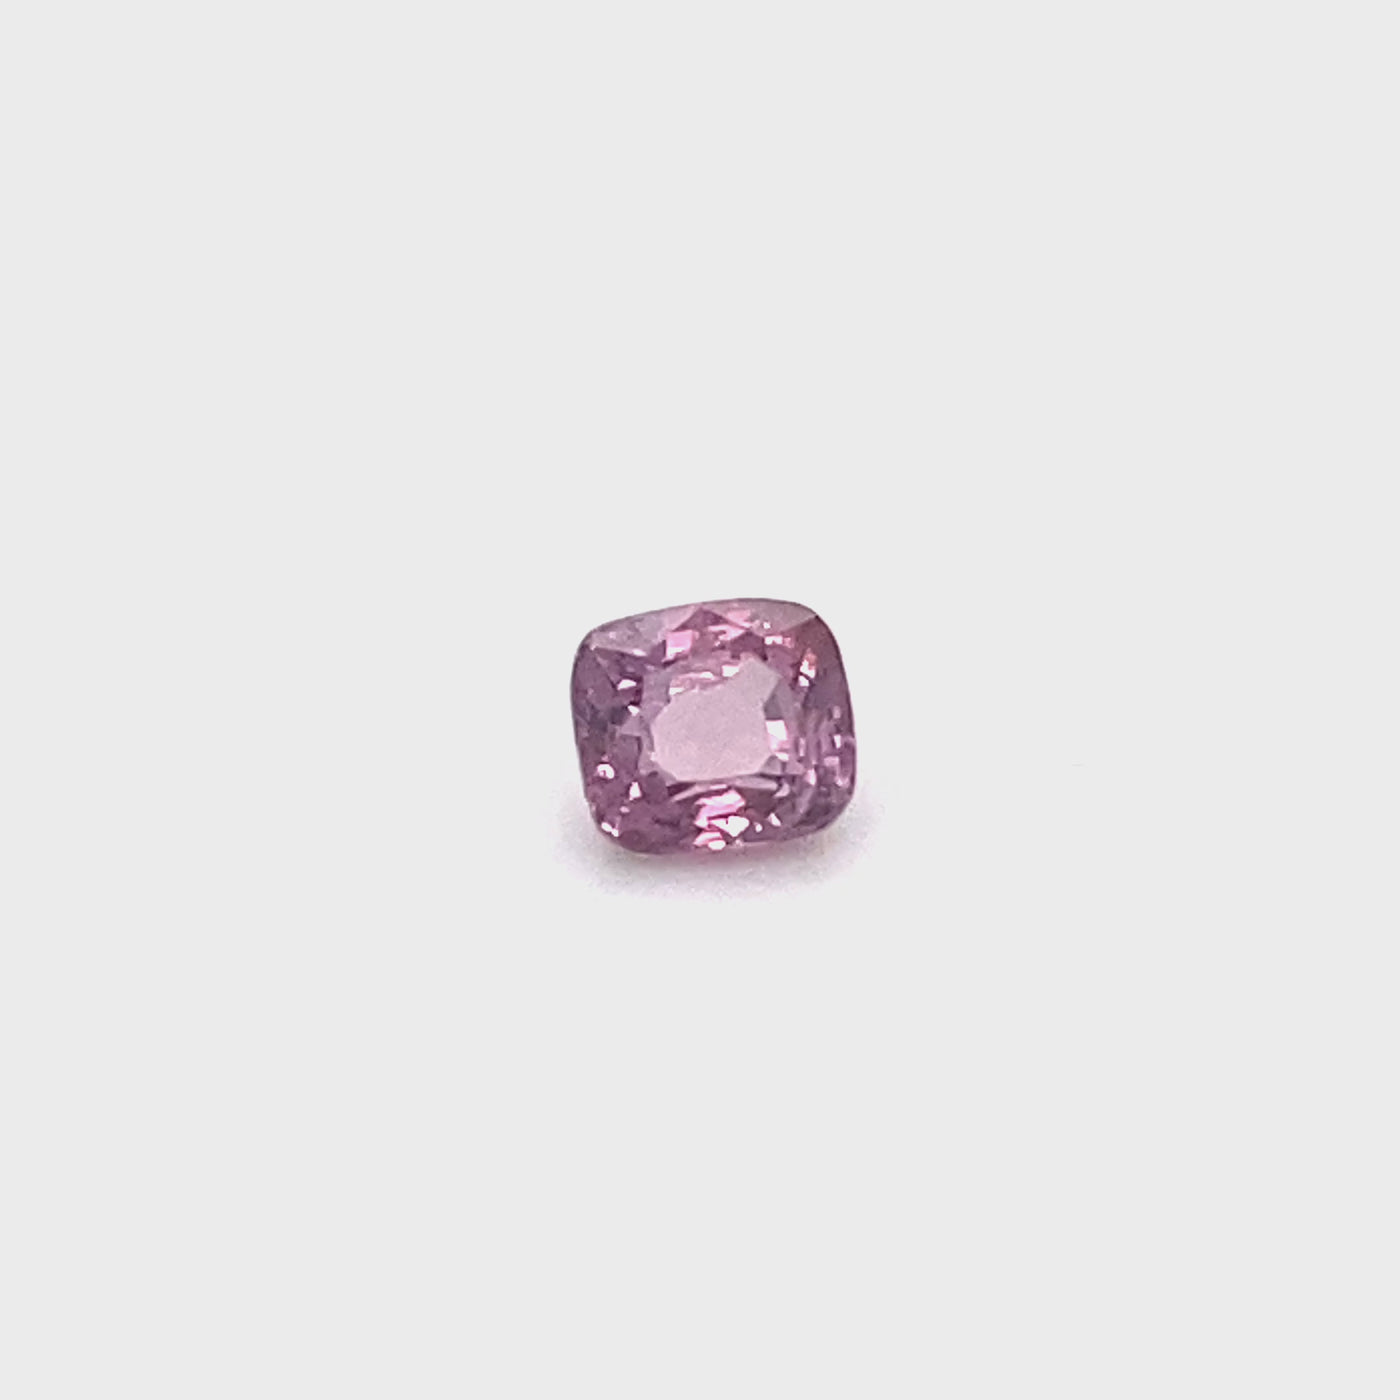 Spinelle rose 1.07 carats coussin